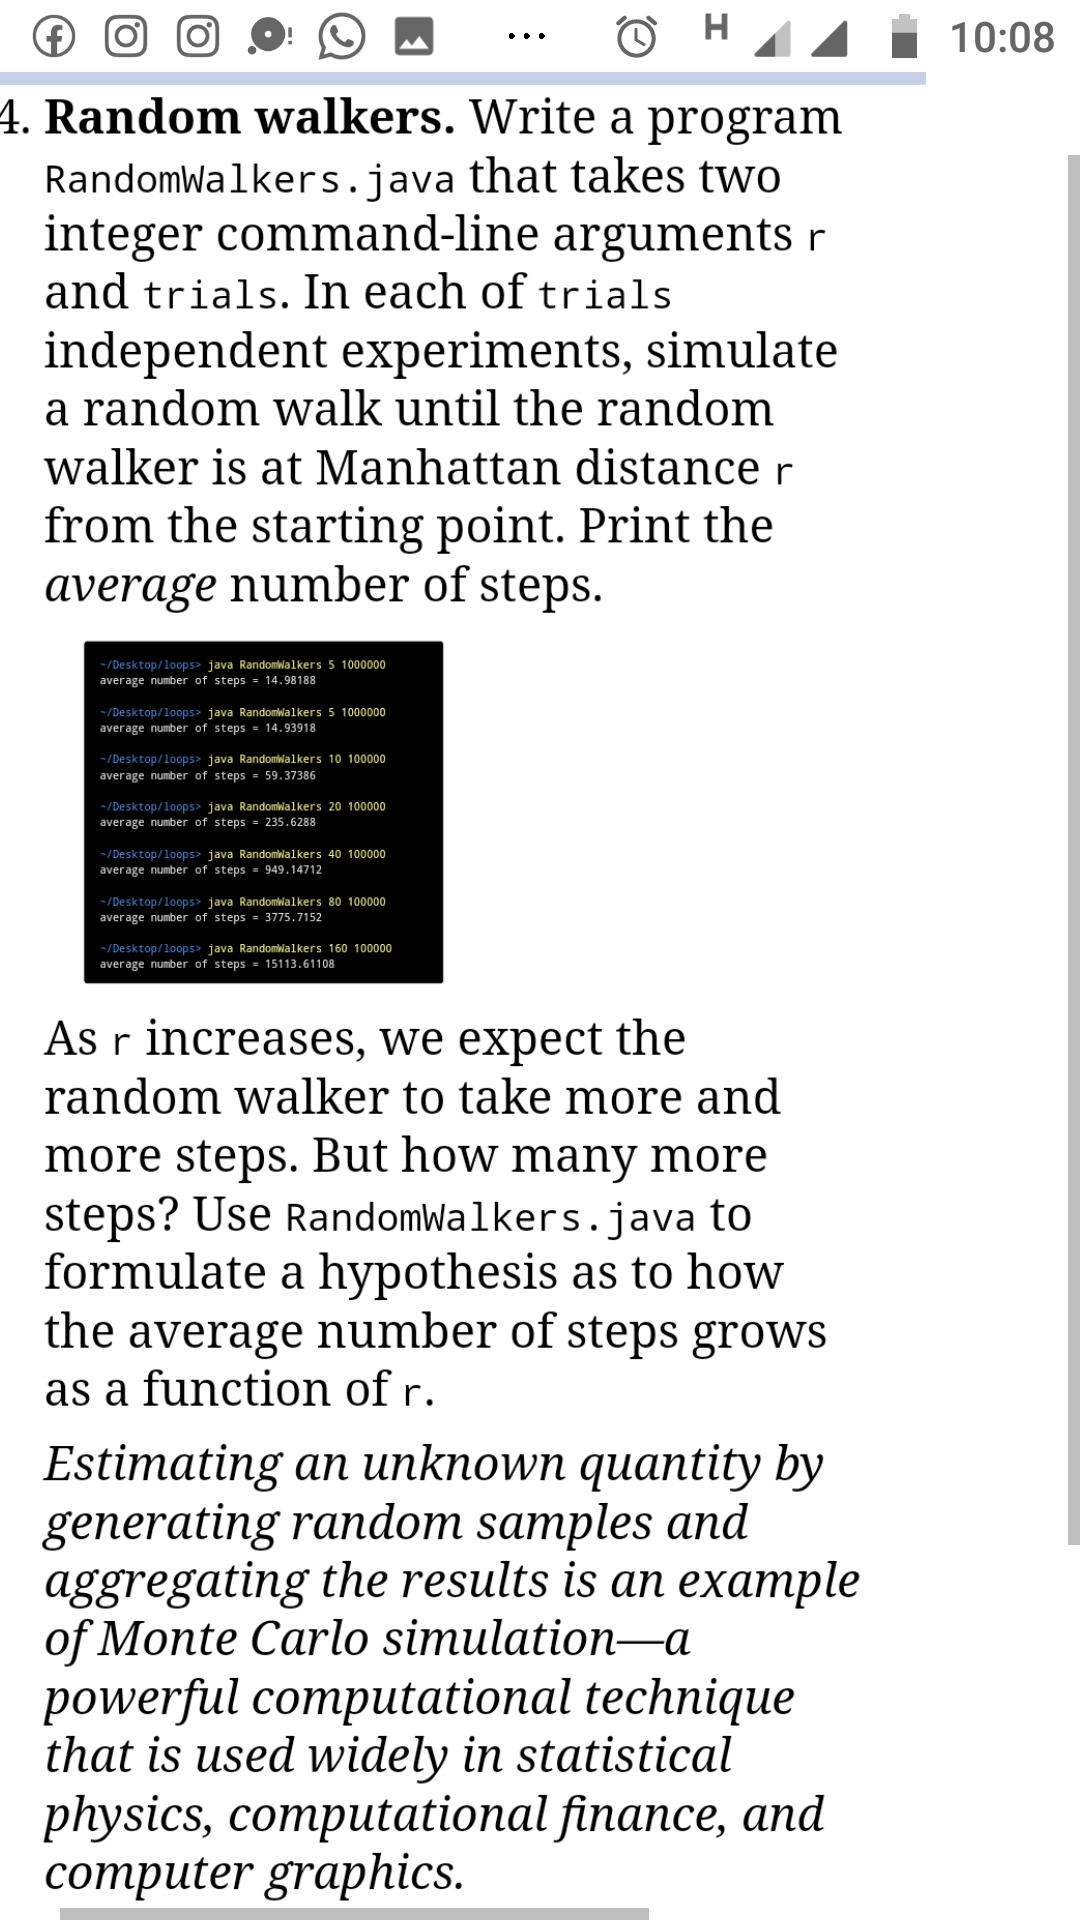 (€)
10:08
••.
4. Random walkers. Write a program
RandomWalkers.java that takes two
integer command-line arguments r
and trials. In each of trials
independent experiments, simulate
a random walk until the random
walker is at Manhattan distance r
from the starting point. Print the
average number of steps.
-/Desktop/loops> java Randomwalkers 5 1000000
average number of steps = 14.98188
-/Desktop/loops> java Randomlalkers 5 1000000
average number of steps = 14.93918
-/Desktop/loops> java Randomlalkers 10 100000
average number of steps = 59.37386
-/Desktop/loops> java Randomlalkers 20 100000
average number of steps = 235.6288
-/Desktop/loops> java Randomwalkers 40 100000
average number of steps = 949.14712
-/Desktop/loops> java Randomwalkers 80 100000
average number of steps = 3775.7152
-/Desktop/loops> java Randomwalkers 160 100000
average number of steps = 15113.61108
As r increases, we expect the
random walker to take more and
more steps. But how many more
steps? Use RandomWalkers.java to
formulate a hypothesis as to how
the average number of steps grows
as a function of r.
Estimating an unknown quantity by
generating random samples and
aggregating the results is an example
of Monte Carlo simulation–a
powerful computational technique
that is used widely in statistical
physics, computational finance, and
сотрuter graphics.
